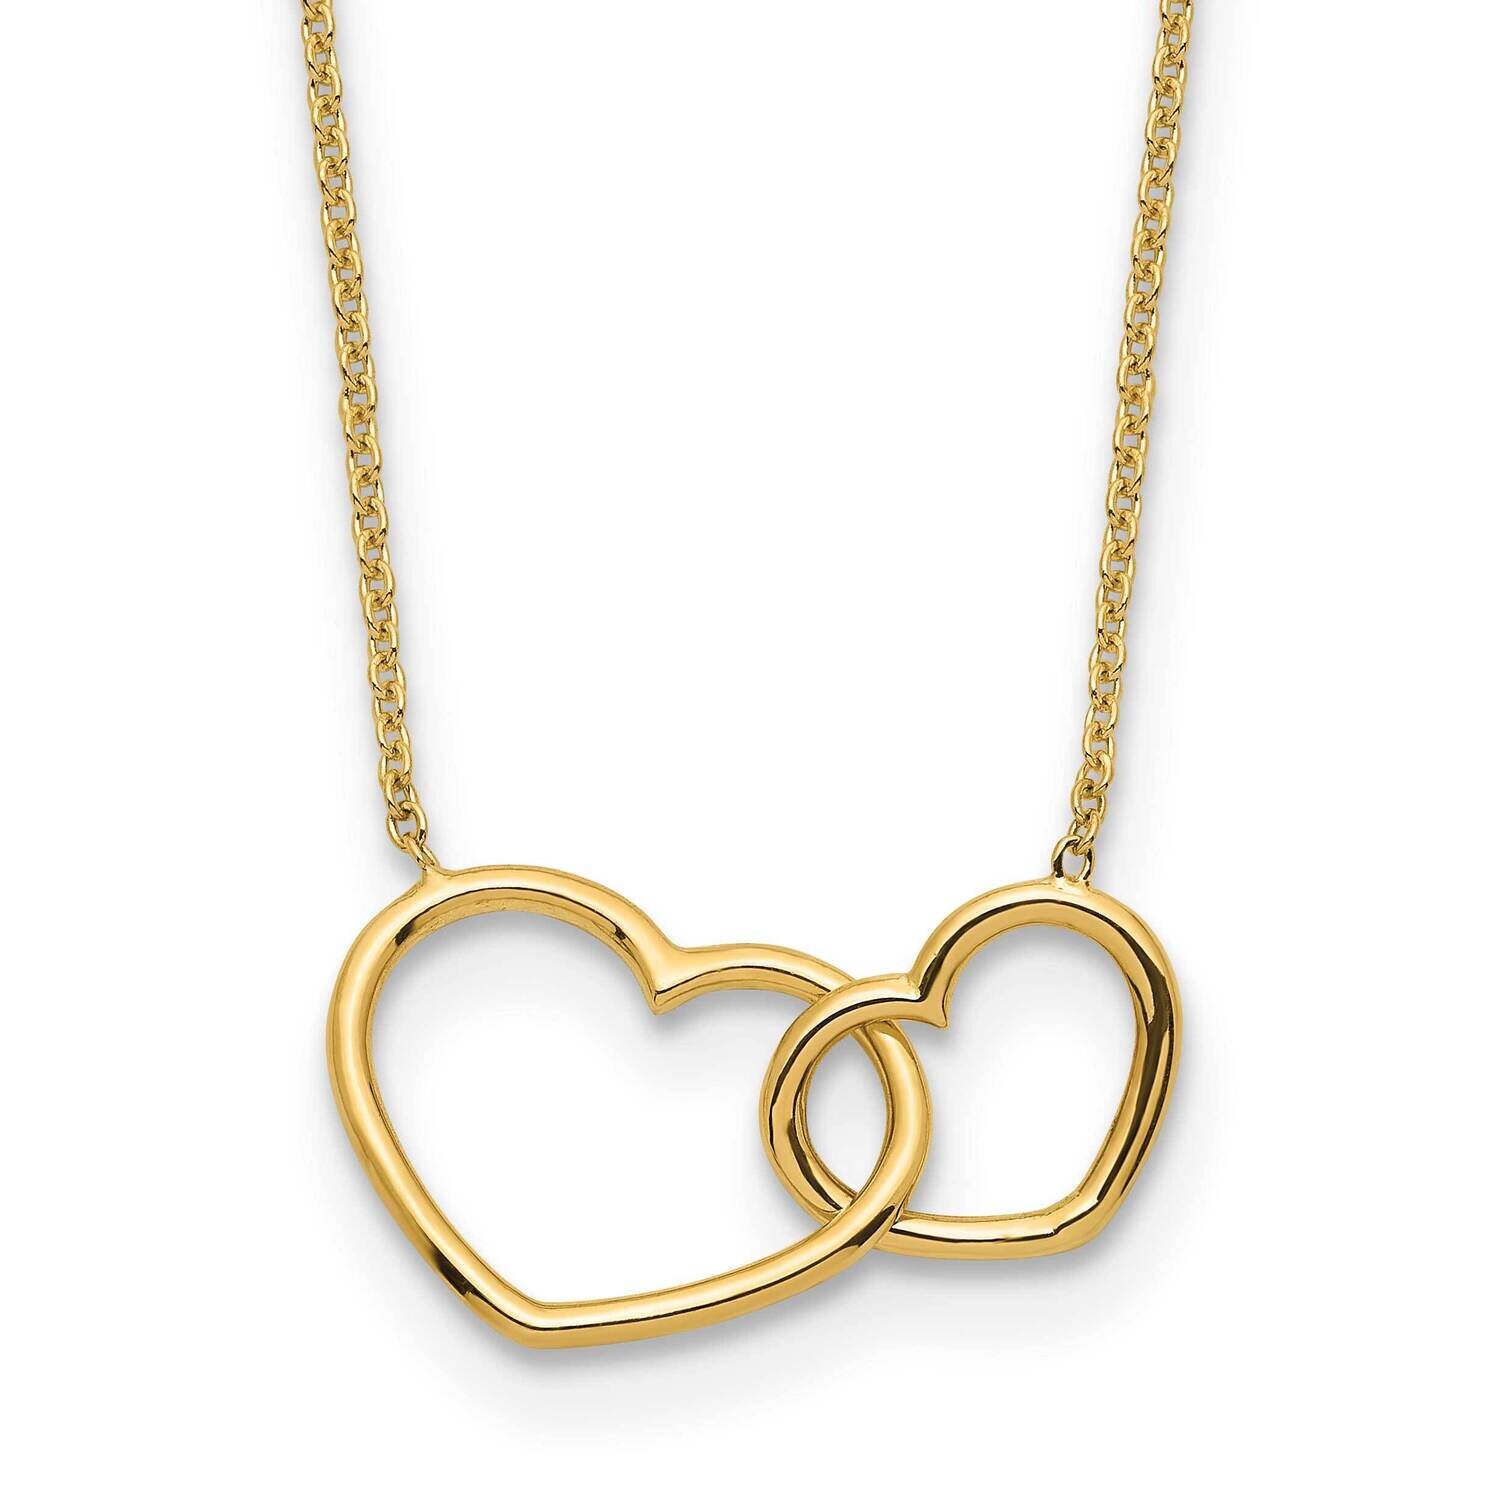 Double Heart Necklace 17 Inch 14k Gold Polished SF2884-17